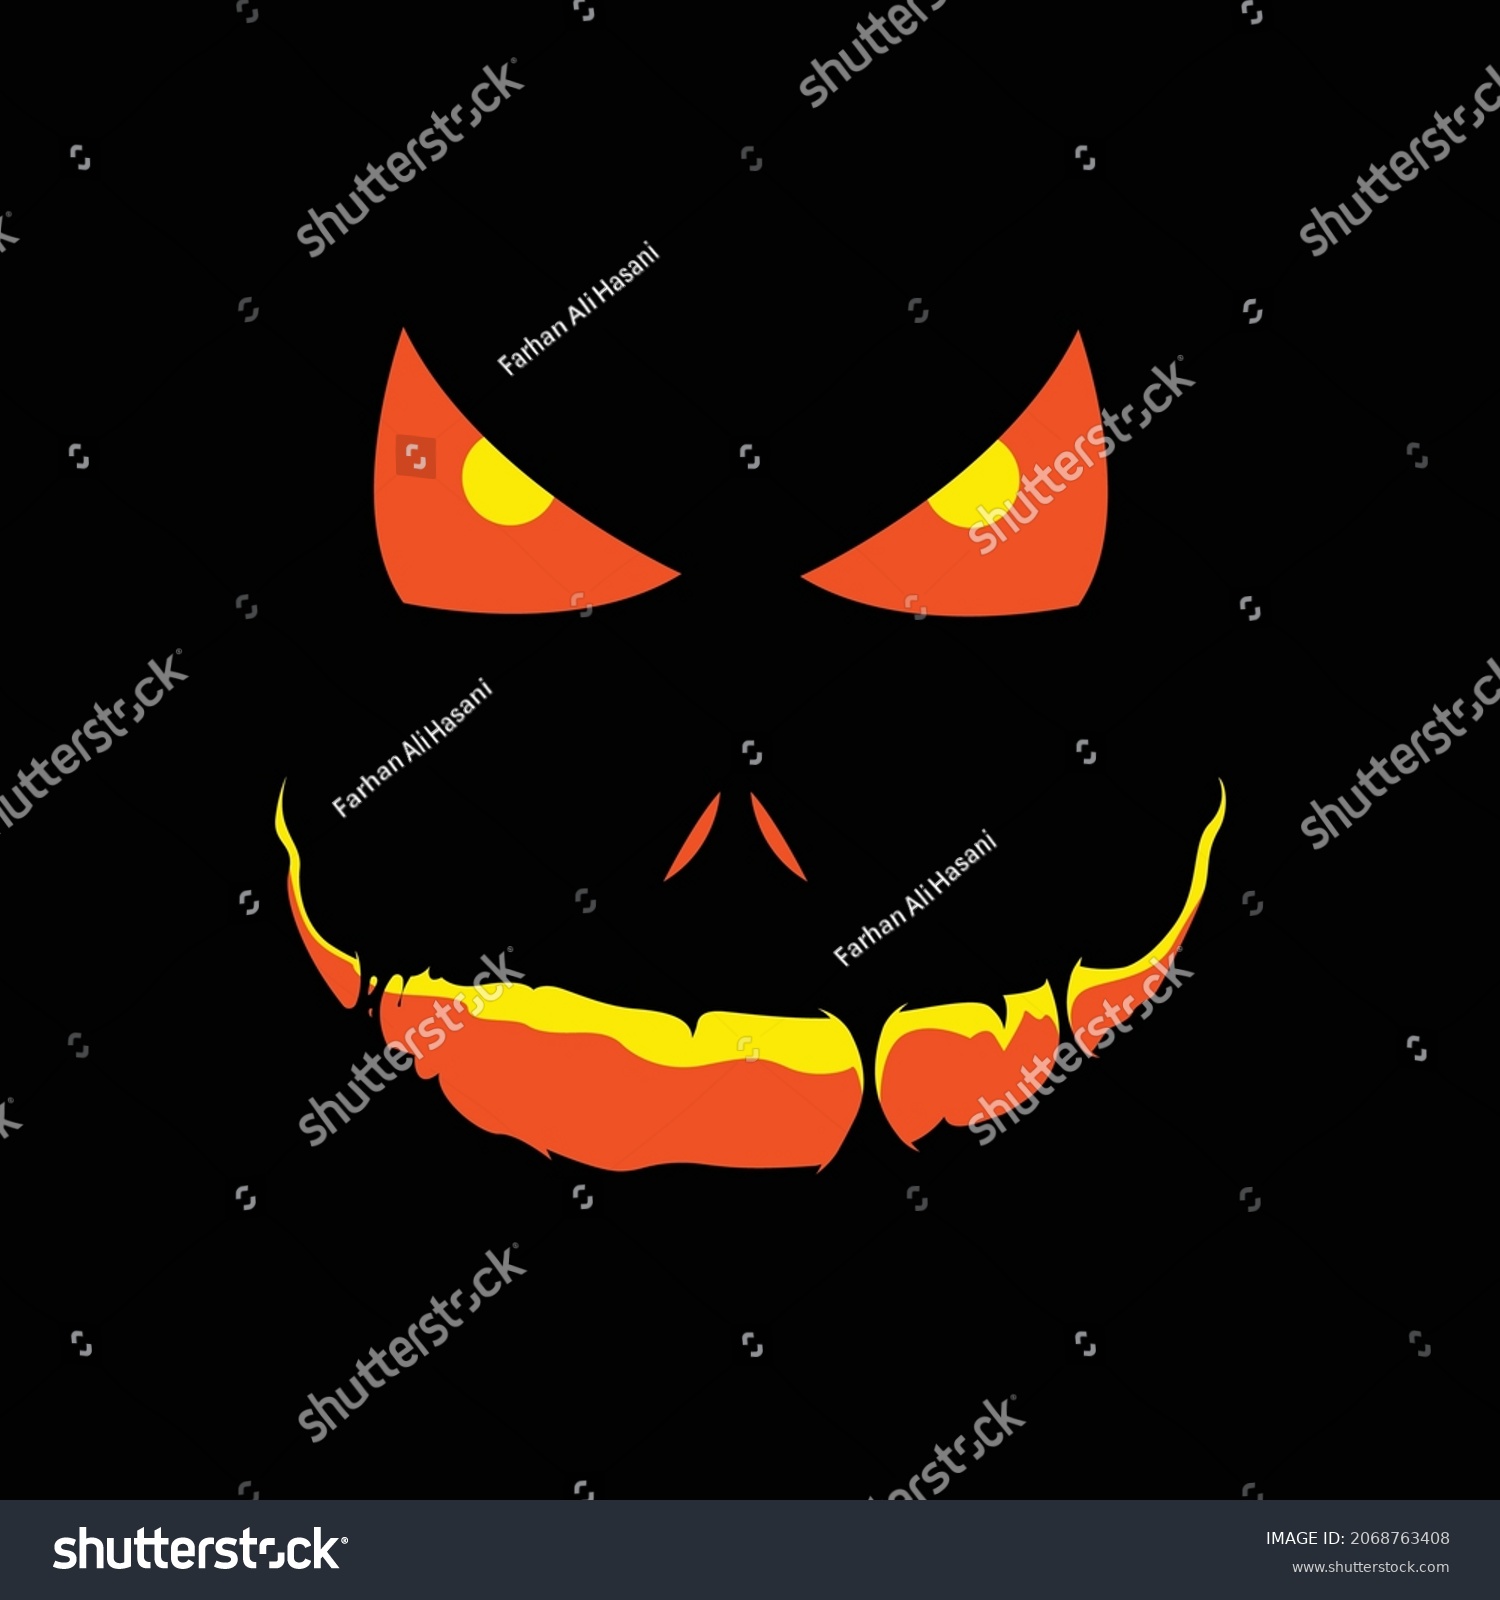 SVG of pumpkin face carving with glowing mouth nose and eyes stitched mouth looks epic on dark background. Can be used as a printable on clothing or print as a Sticker for accessories like mobile, laptop etc svg